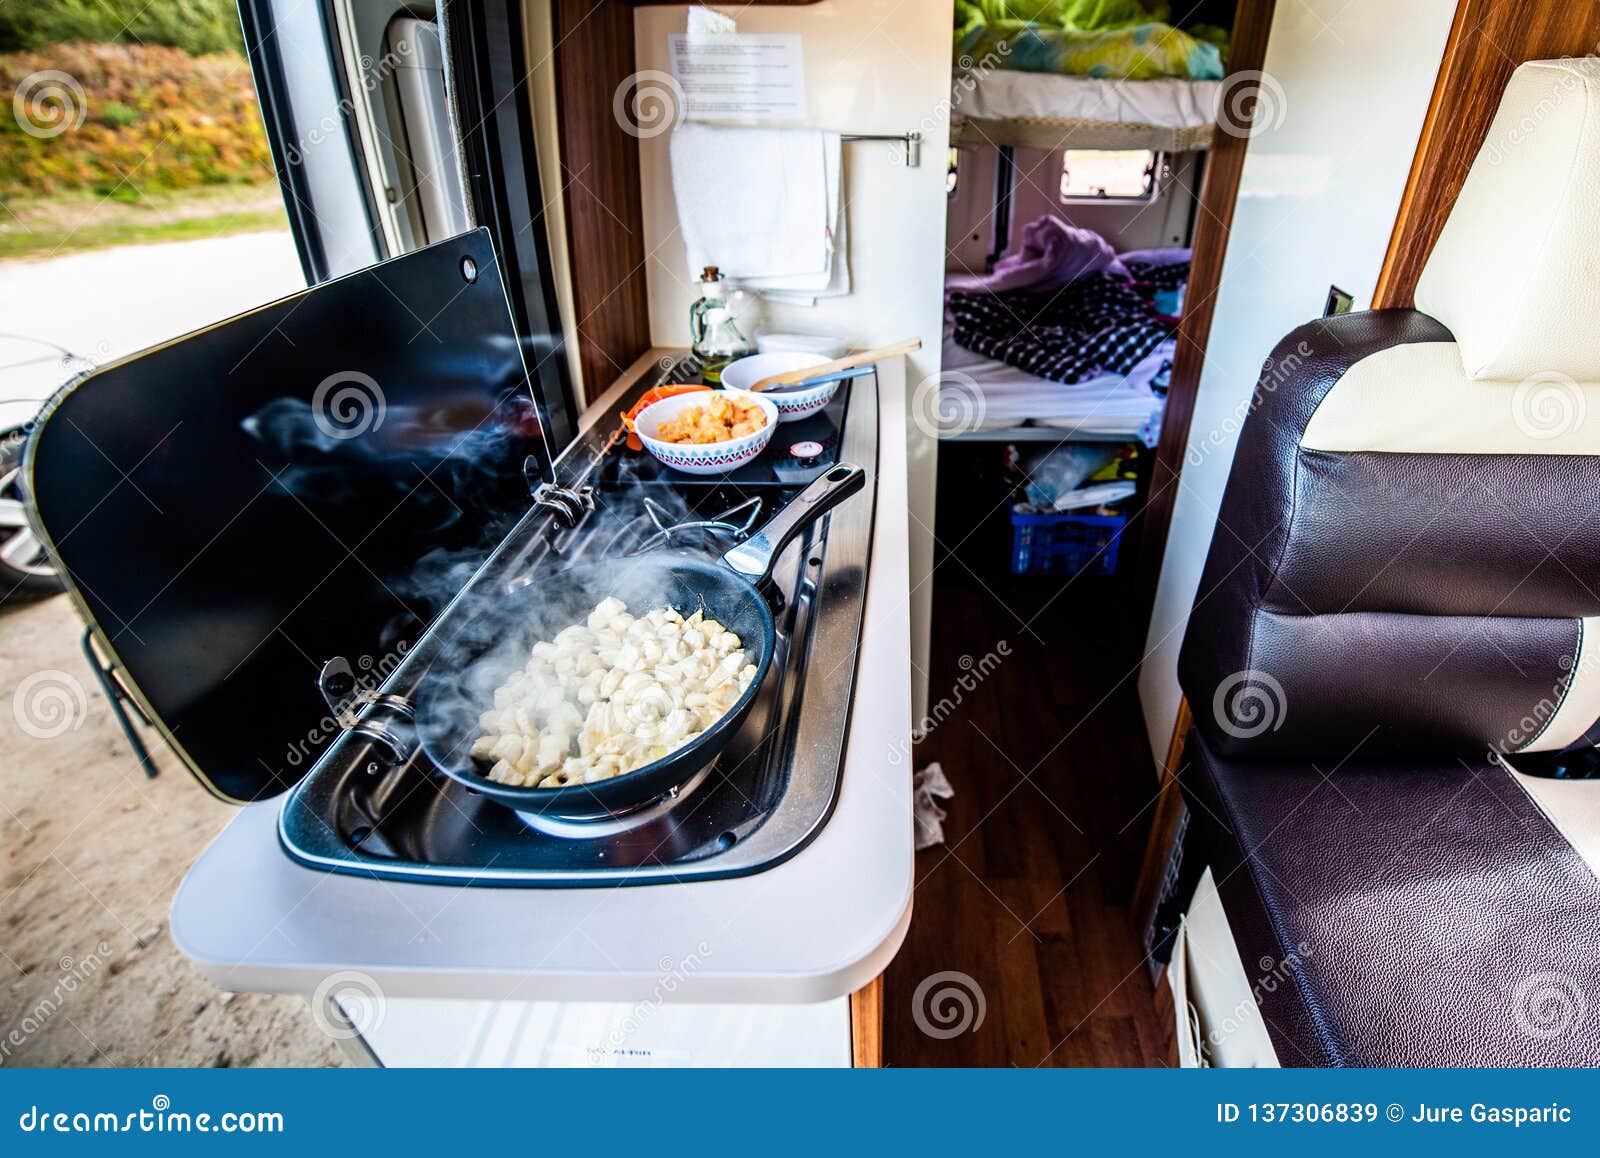 https://thumbs.dreamstime.com/z/cooking-dinner-lunch-campervan-motorhome-rv-cooking-dinner-lunch-campervan-motorhome-rv-preparing-chicken-137306839.jpg